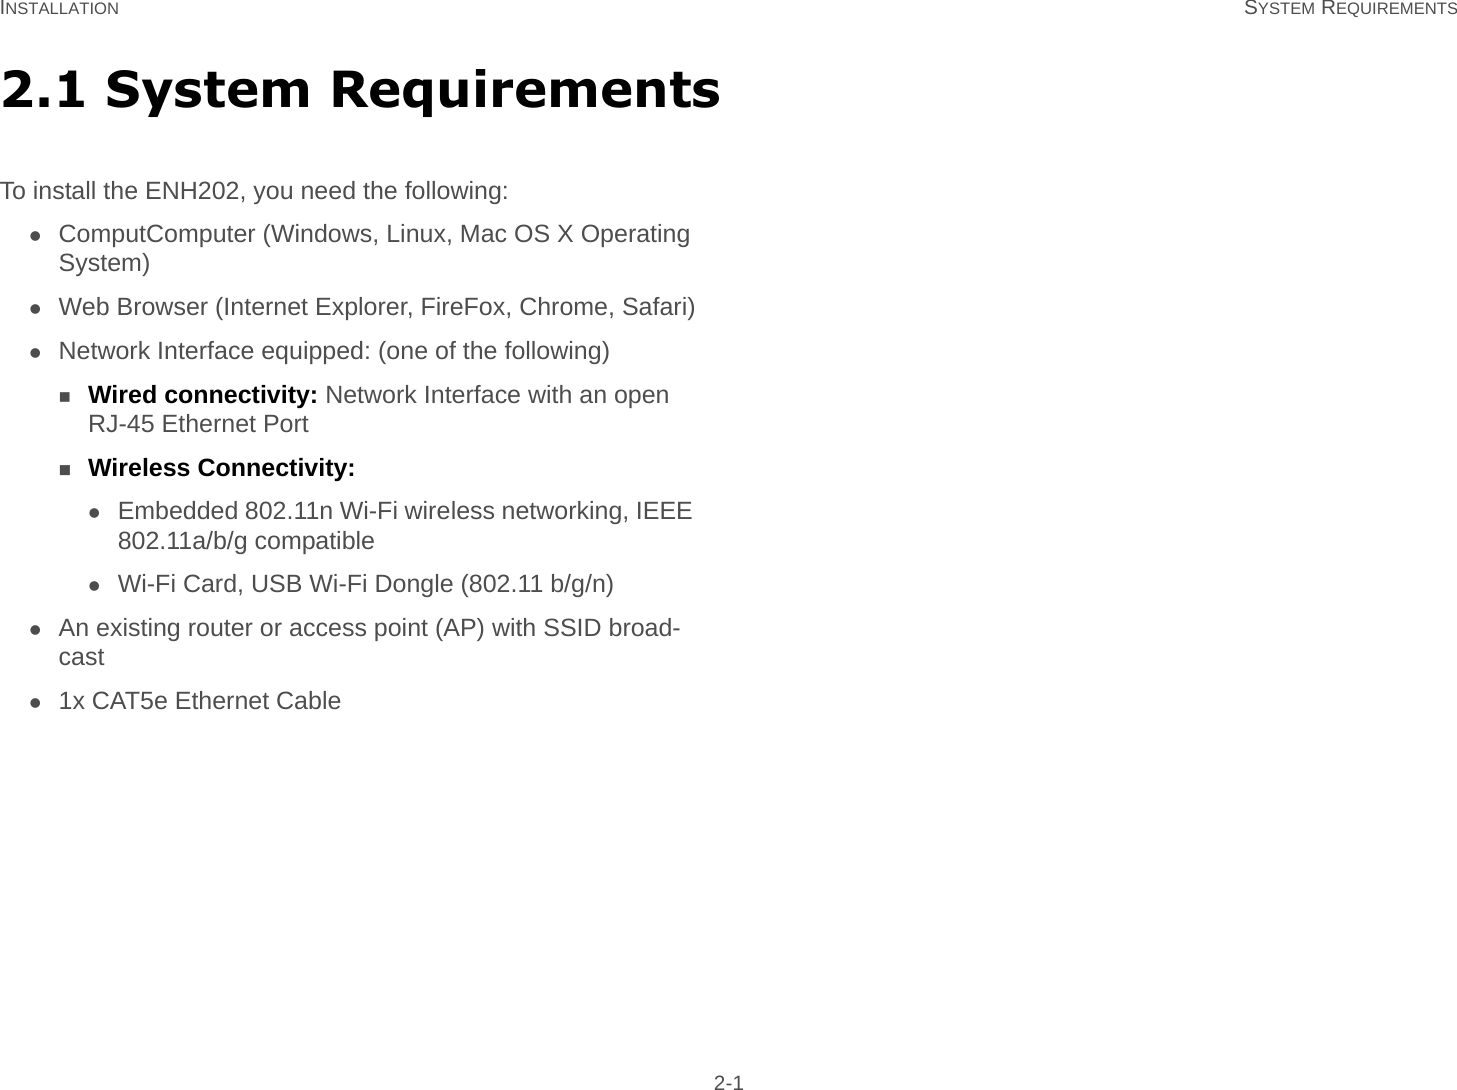 INSTALLATION SYSTEM REQUIREMENTS 2-12.1 System RequirementsTo install the ENH202, you need the following:ComputComputer (Windows, Linux, Mac OS X Operating System)Web Browser (Internet Explorer, FireFox, Chrome, Safari)Network Interface equipped: (one of the following)Wired connectivity: Network Interface with an open RJ-45 Ethernet PortWireless Connectivity:Embedded 802.11n Wi-Fi wireless networking, IEEE 802.11a/b/g compatibleWi-Fi Card, USB Wi-Fi Dongle (802.11 b/g/n)An existing router or access point (AP) with SSID broad-cast1x CAT5e Ethernet Cable